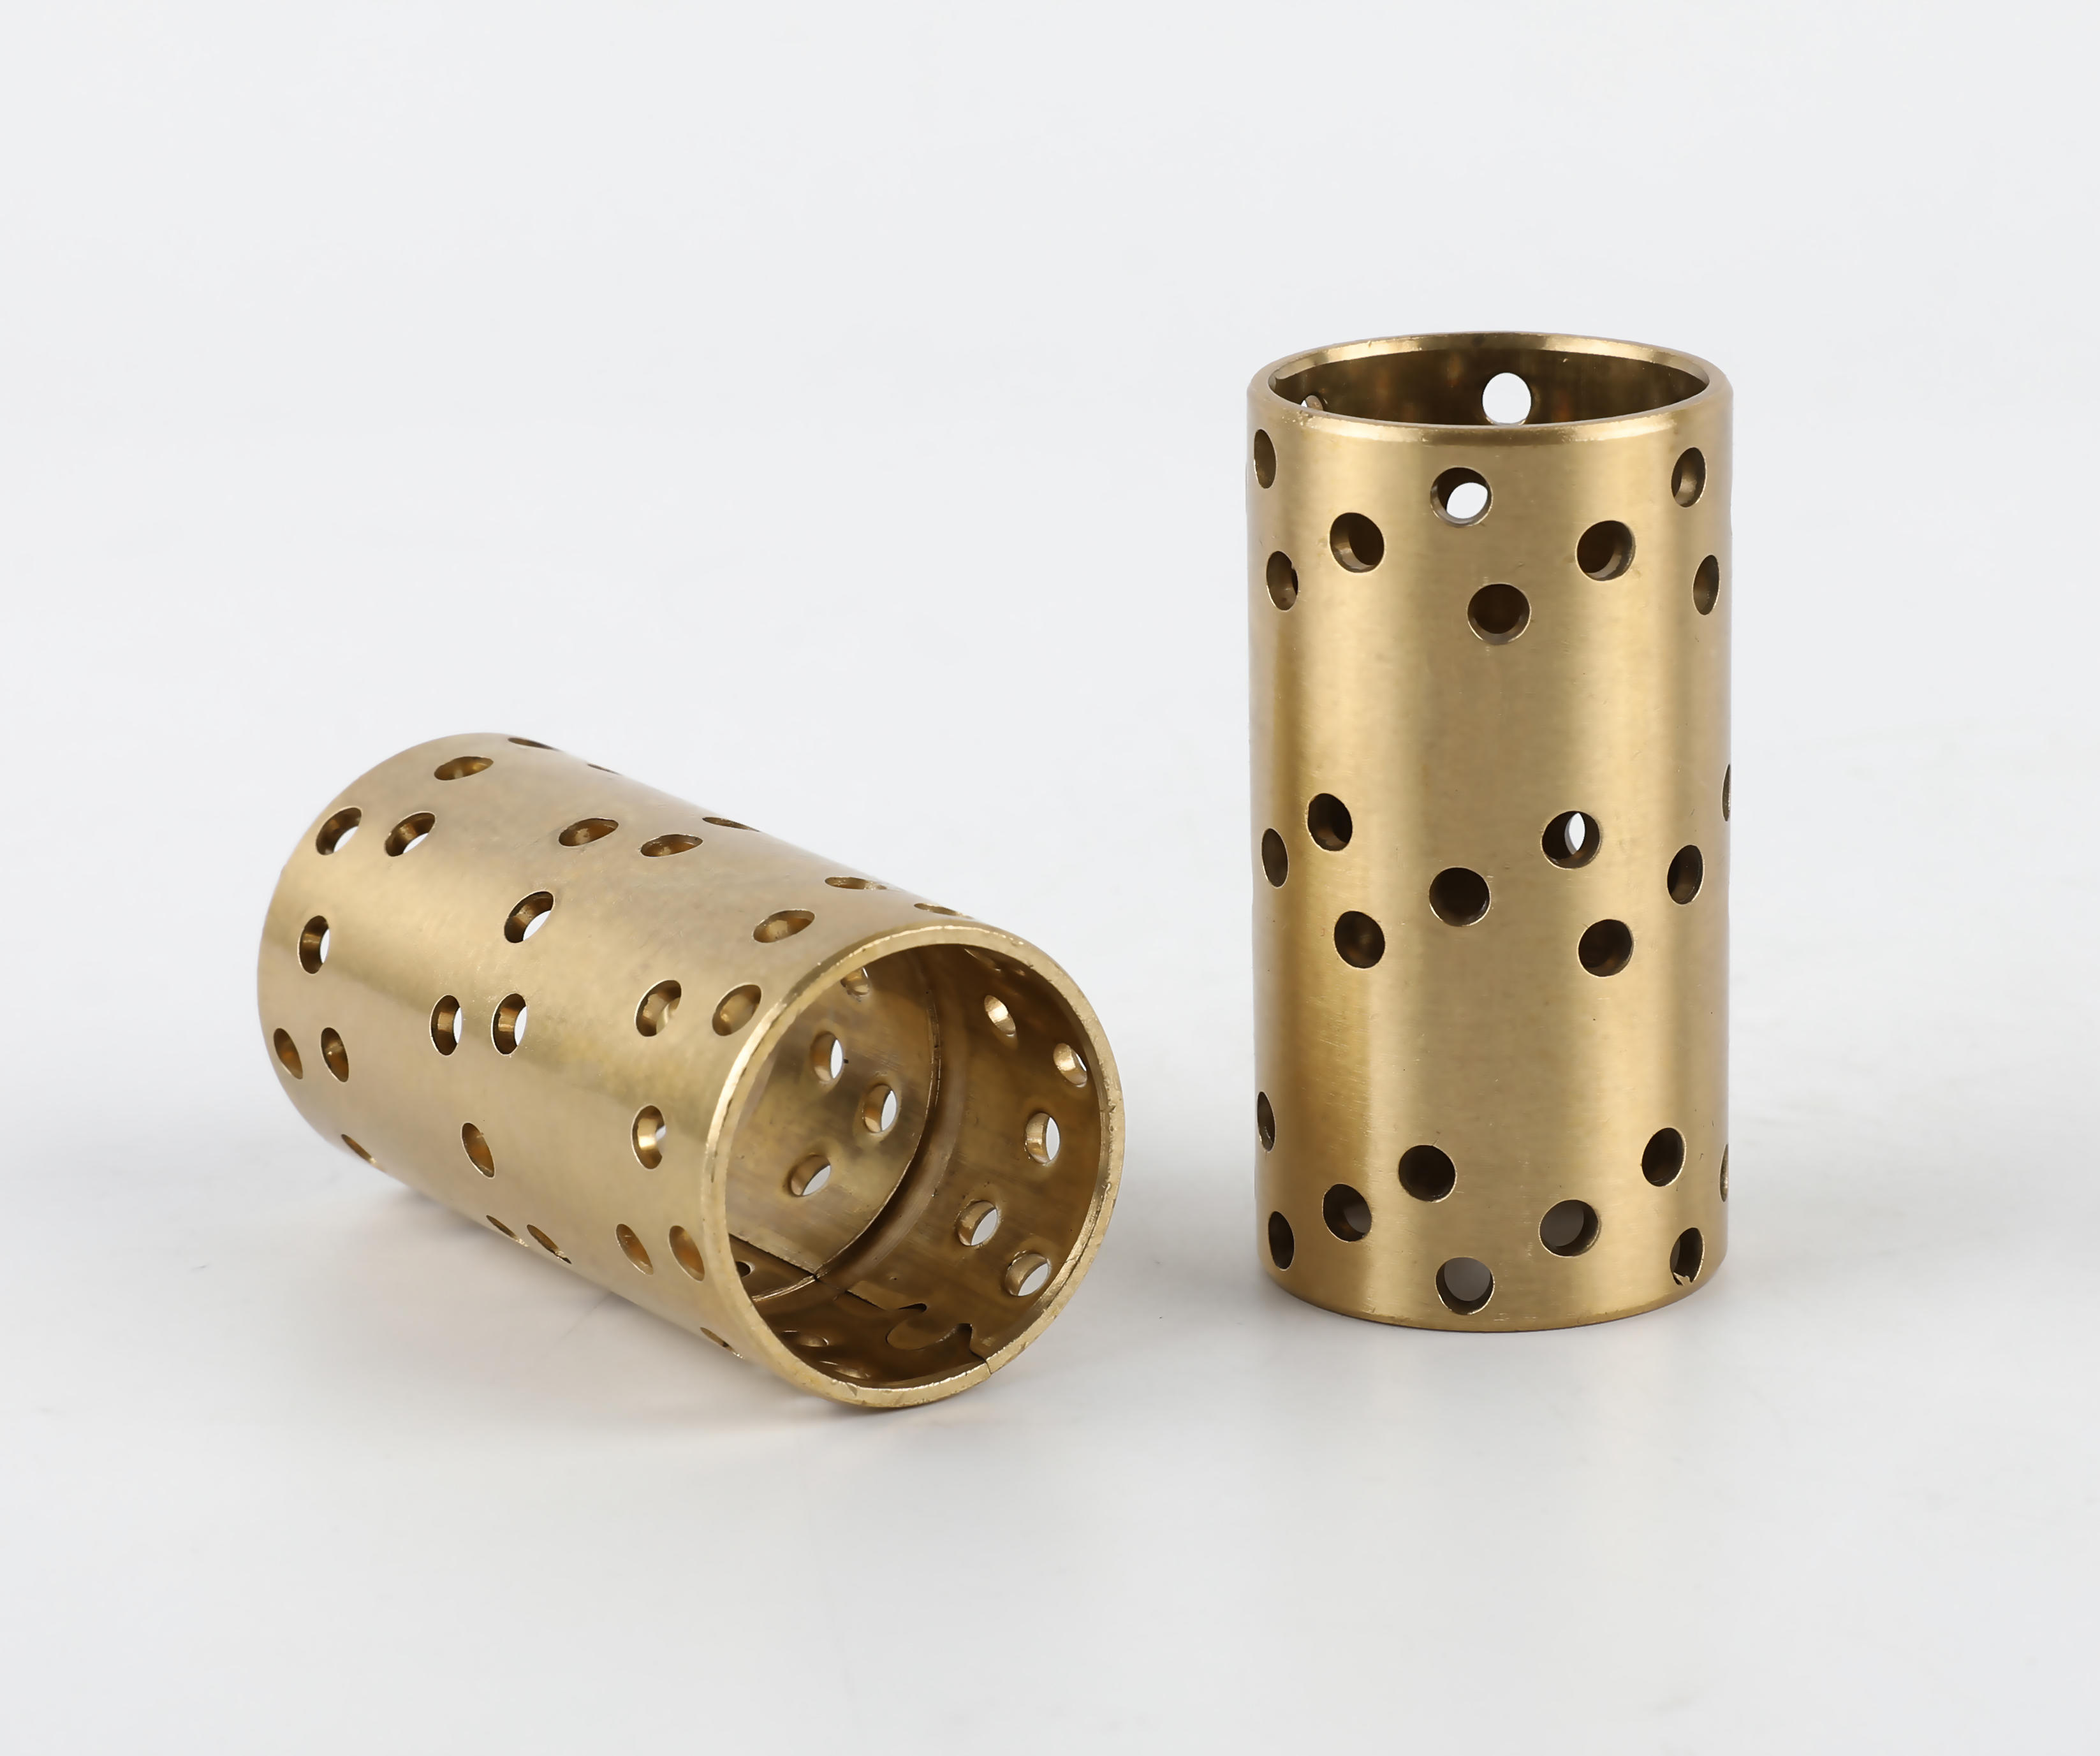 What are the advantages of using brass as a wrapping material for bushing bearings